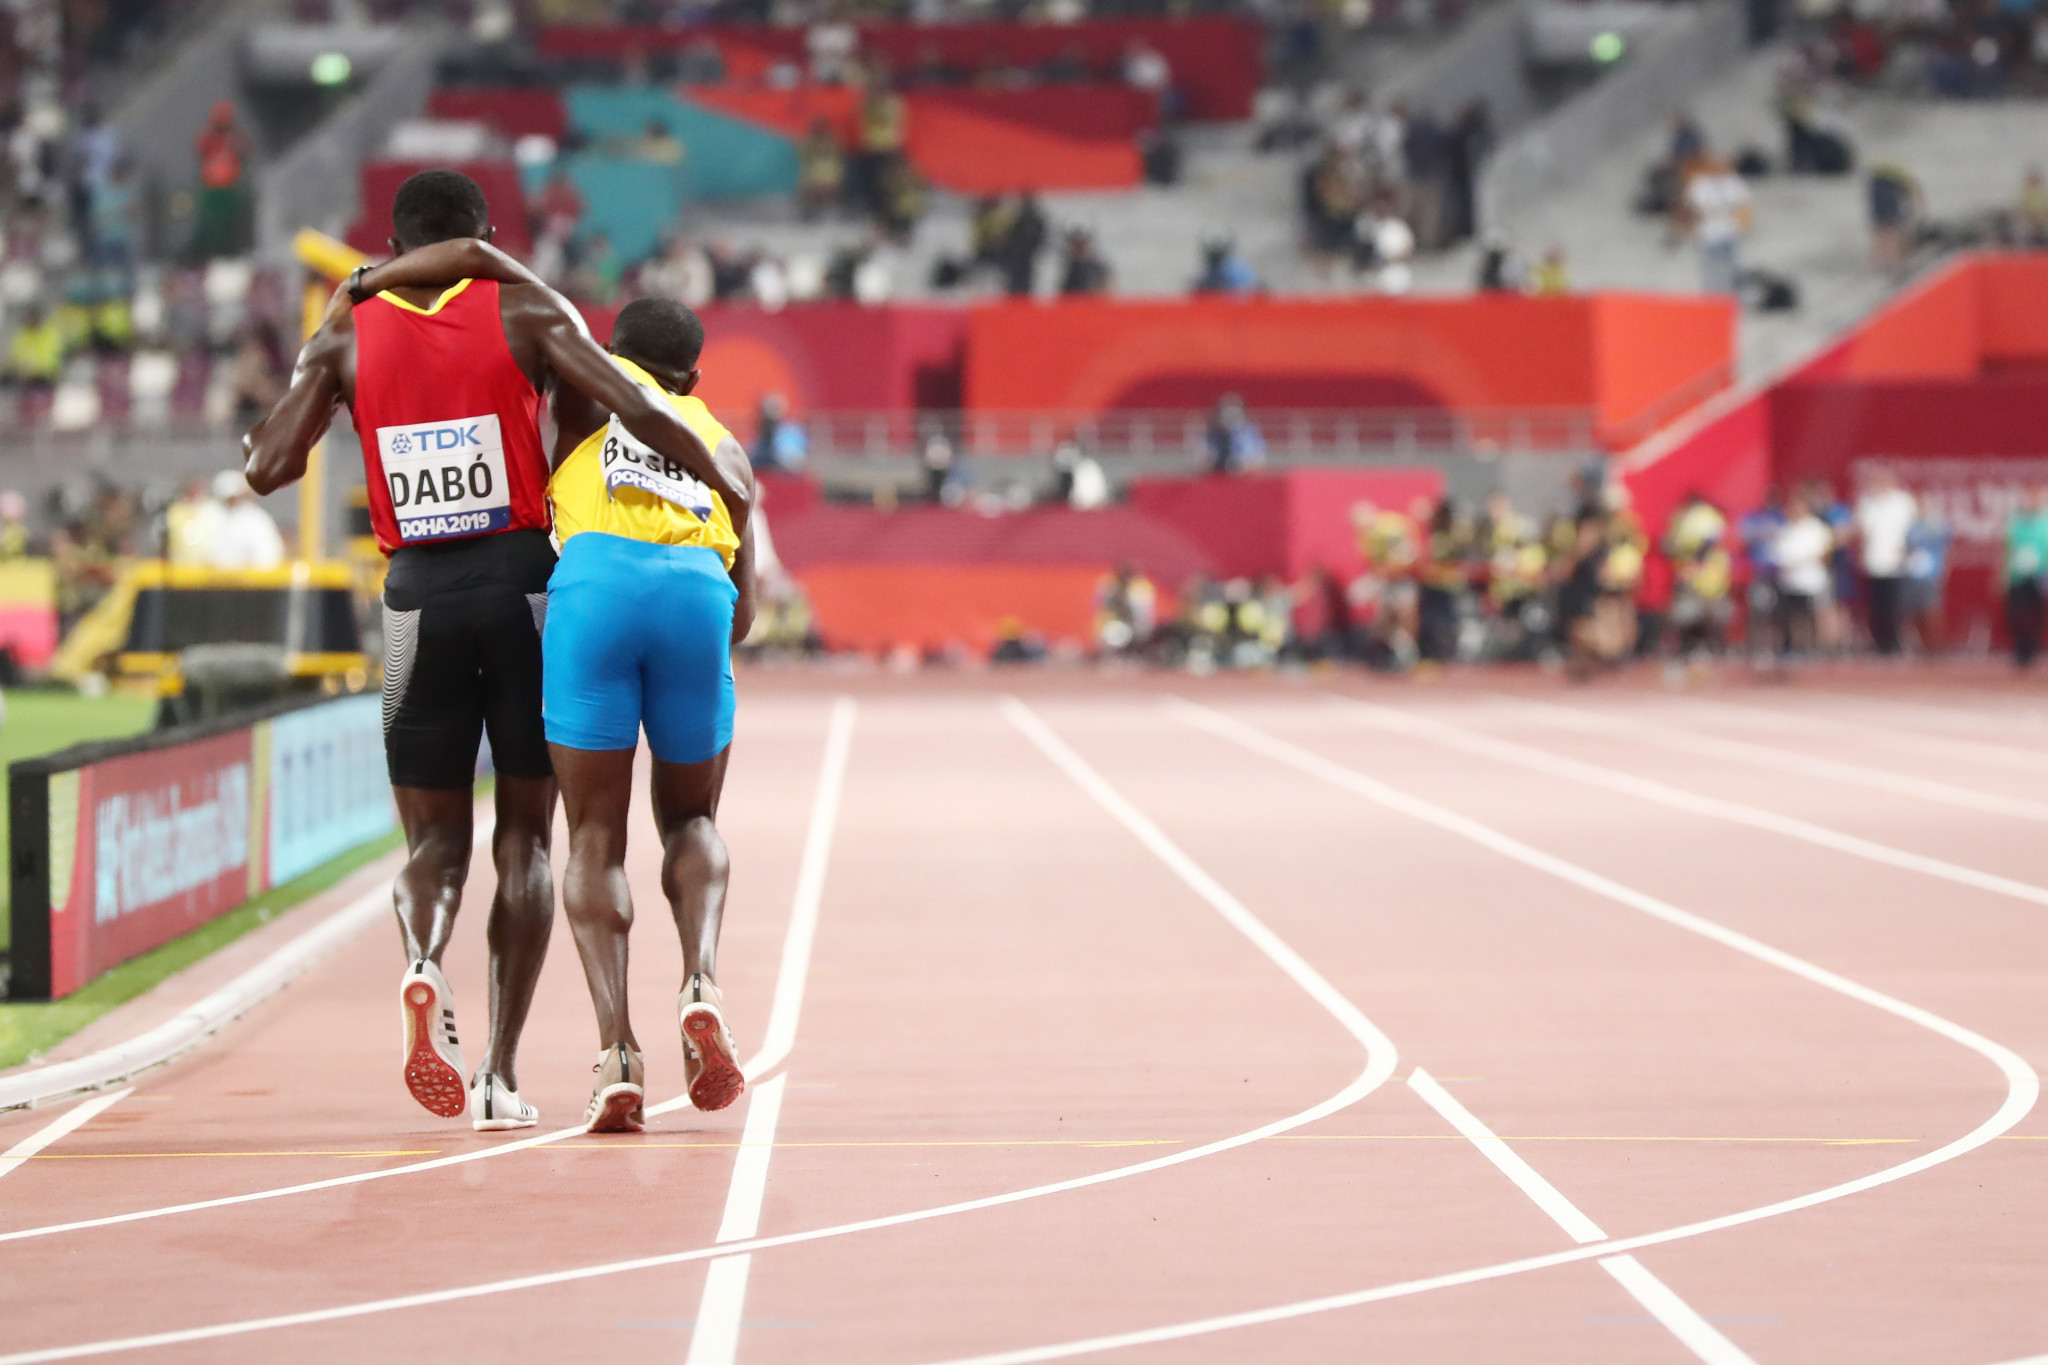 Guinea-Bissau’s Braima Suncar Dabo stopped near the end of his 5,000m heat to help Aruba's Jonathan Busby, who had collapsed with exhaustion ©Getty Images